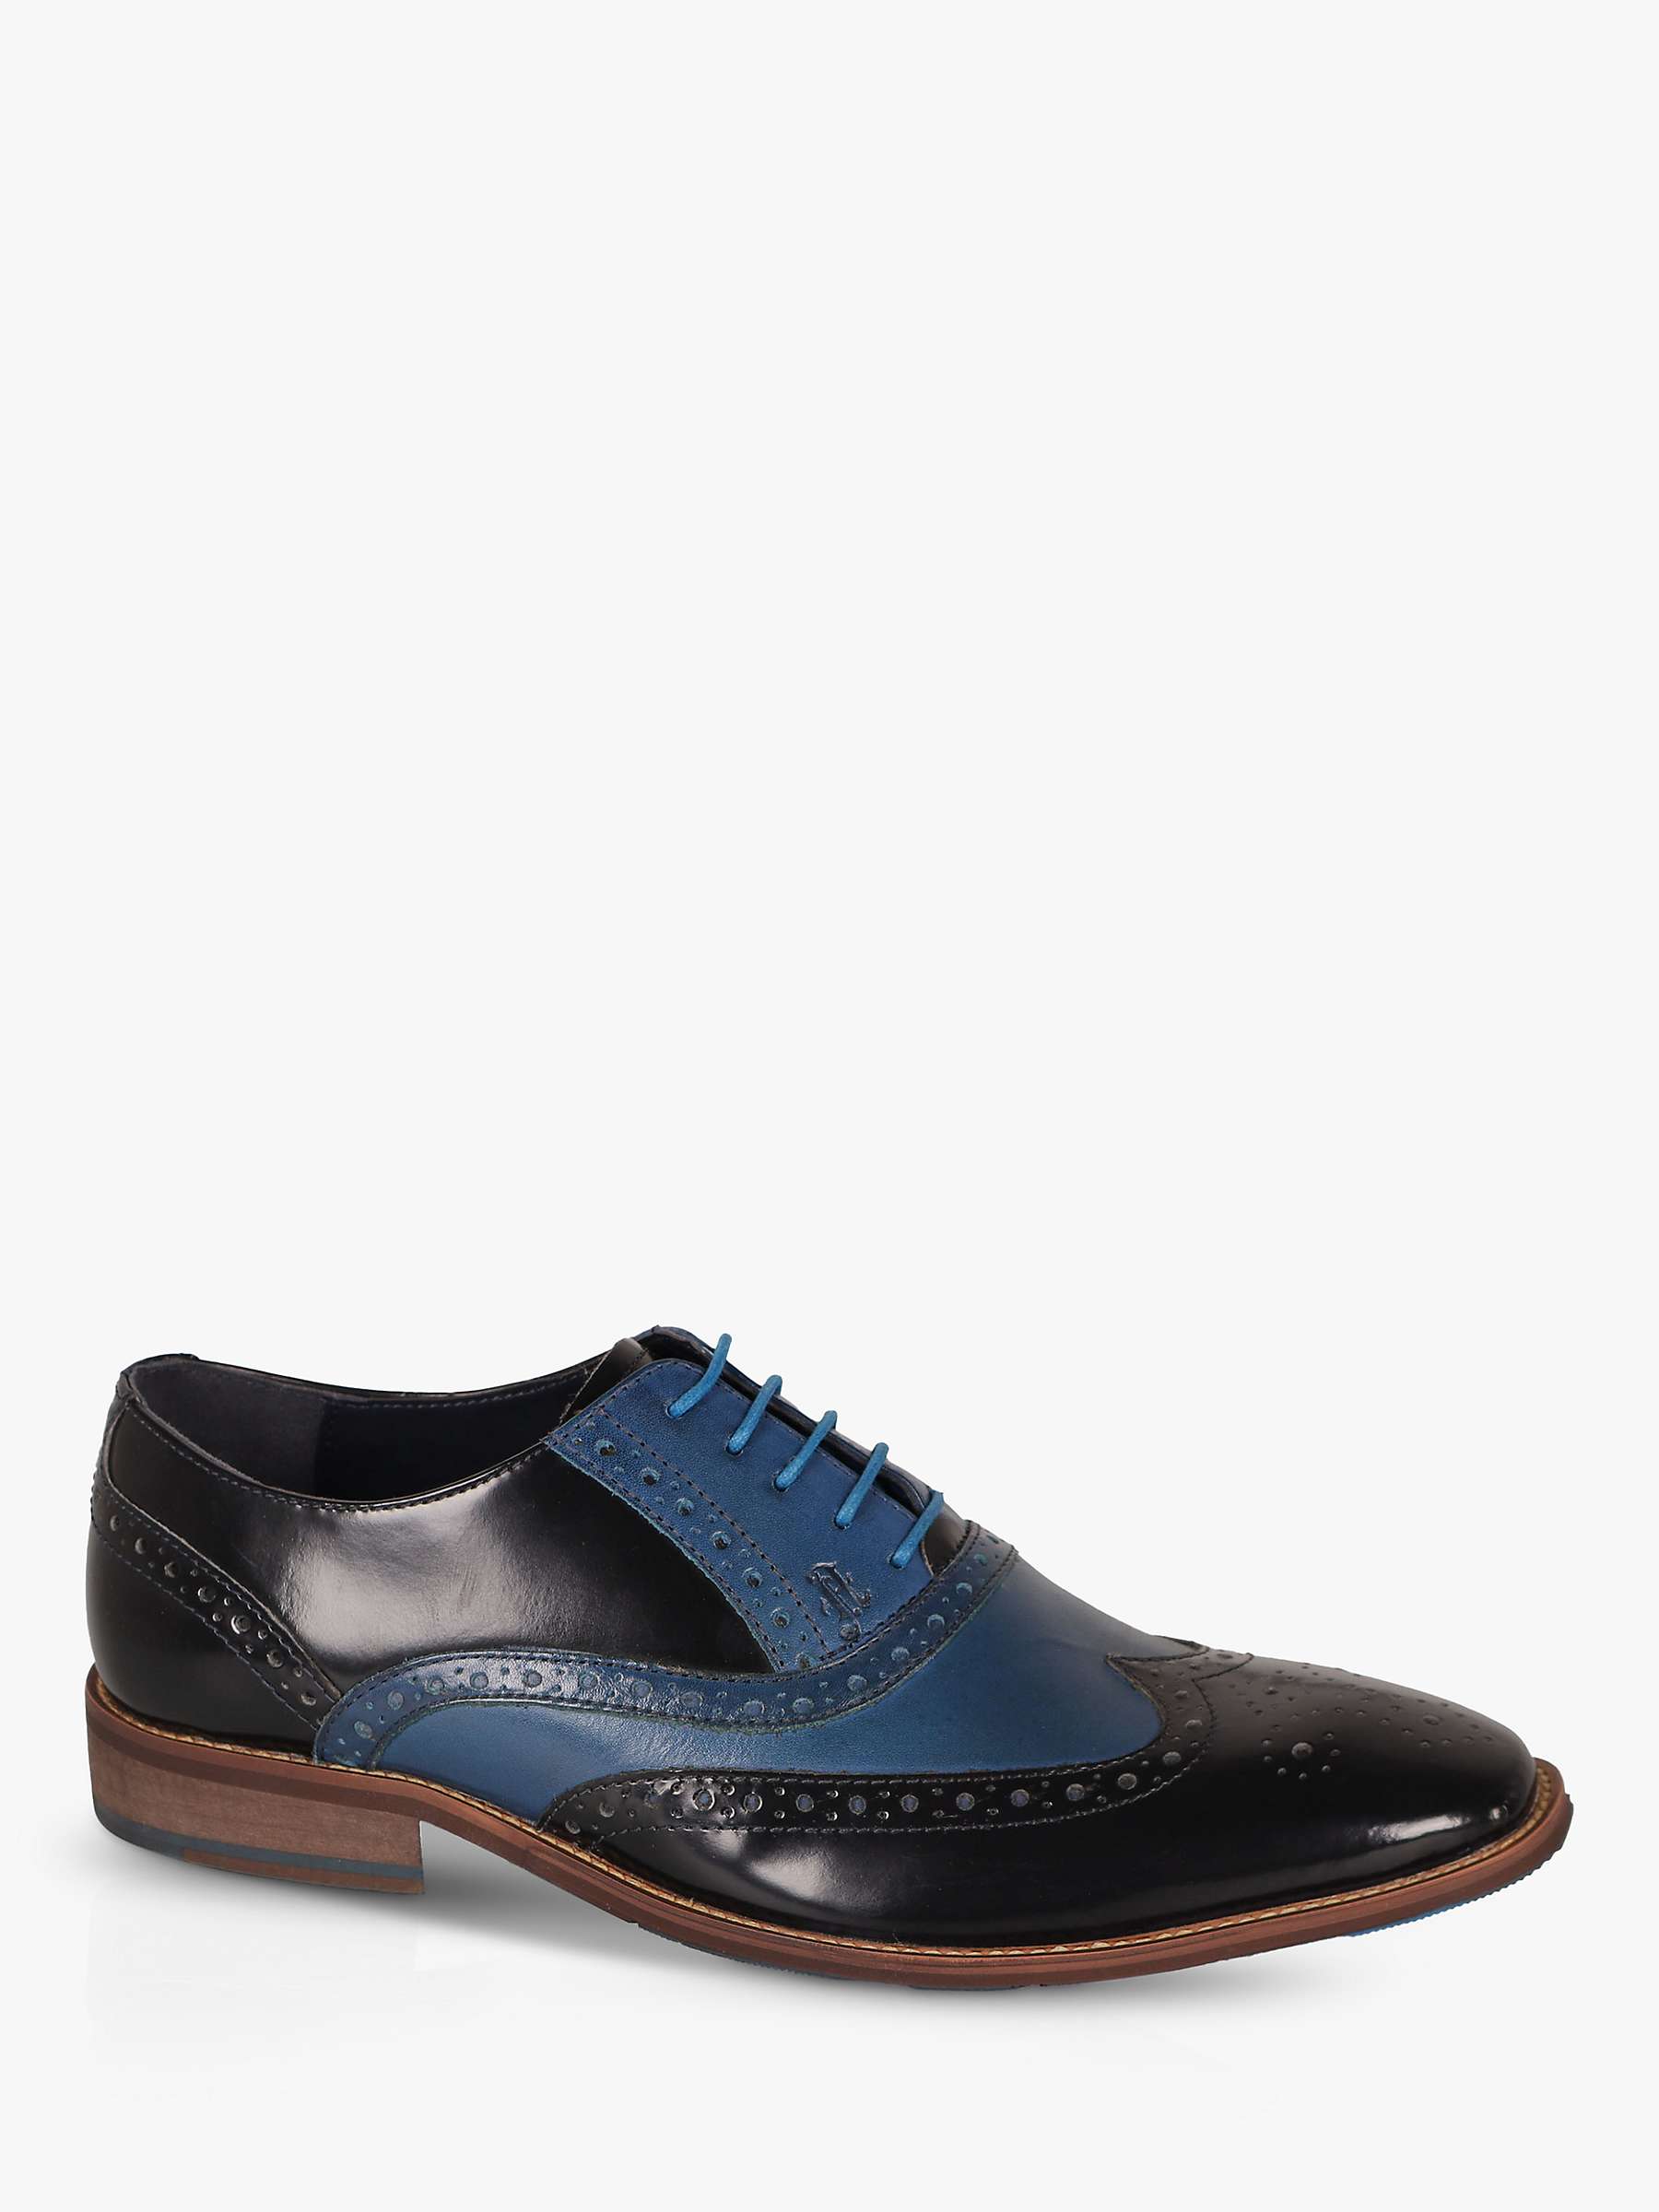 Buy Silver Street London Amen Collection Derry Leather Brogues, Blue/Black Online at johnlewis.com